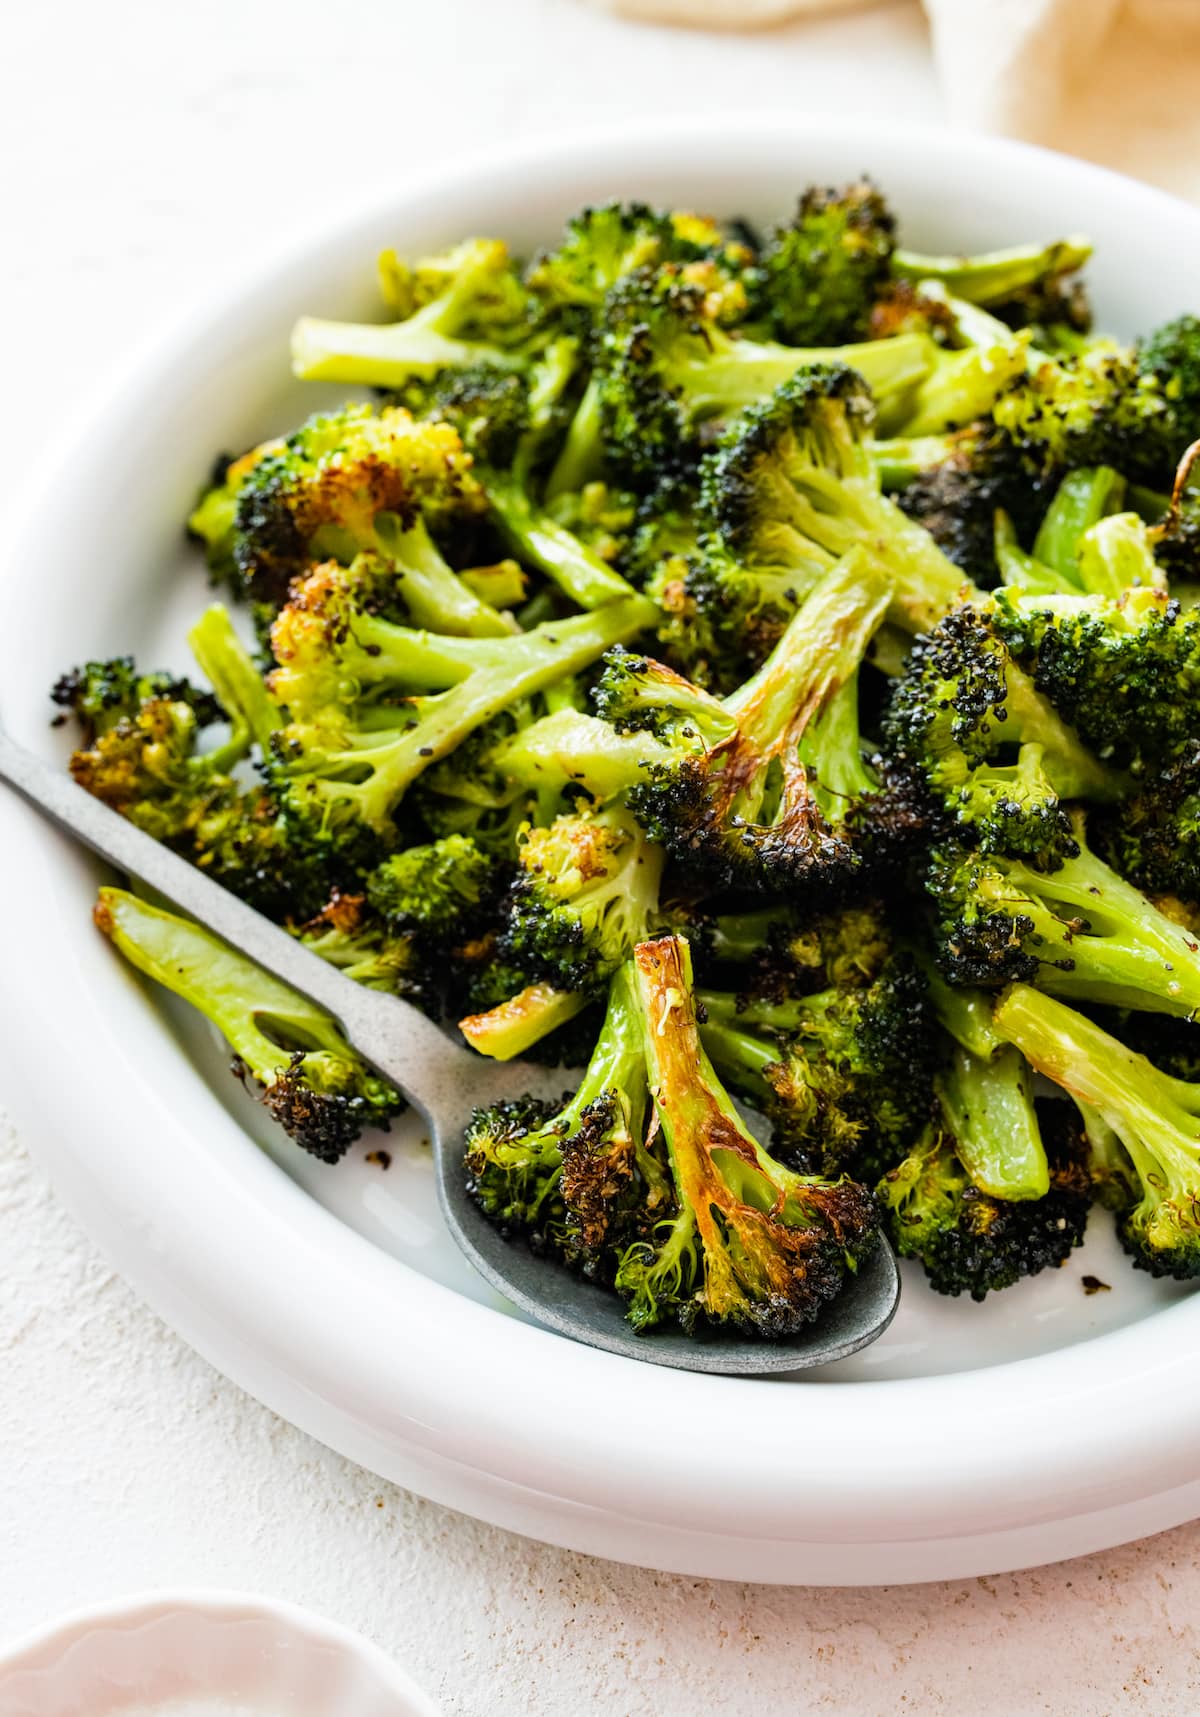 Roasted broccoli on a white plate with a serving spoon.